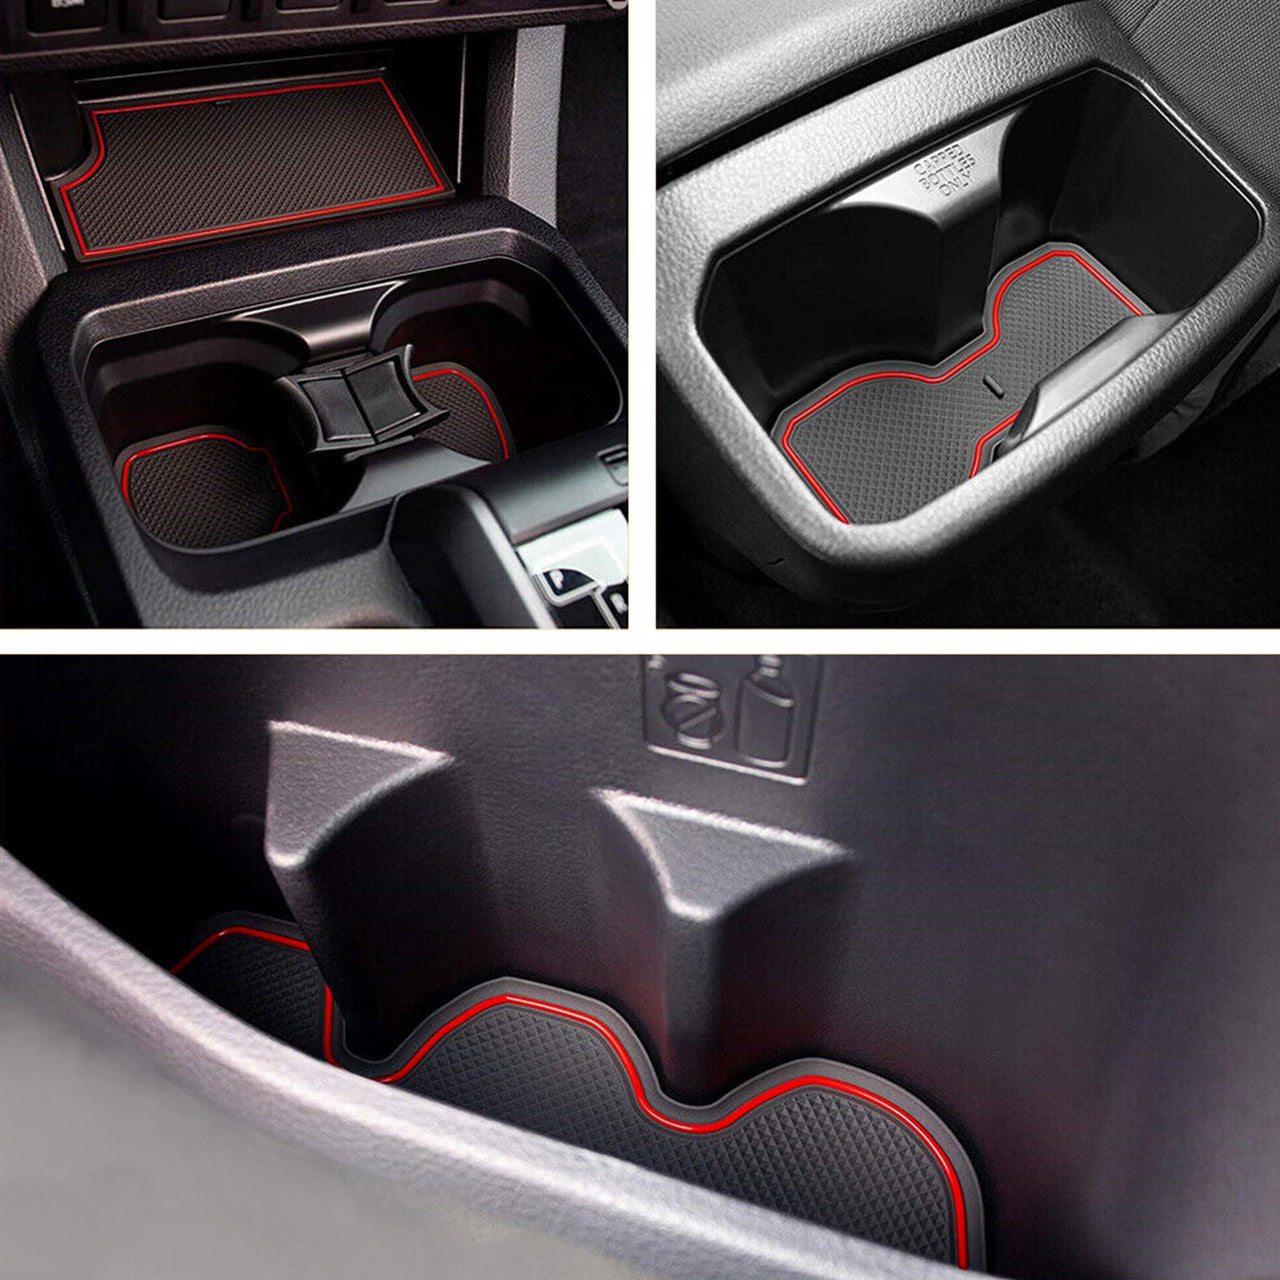 Liner Accessories - For Toyota Tacoma 2016-2022 Car Cup Holder Inserts Center Console Door Pocket Liner Premium Custom Interior (Red)